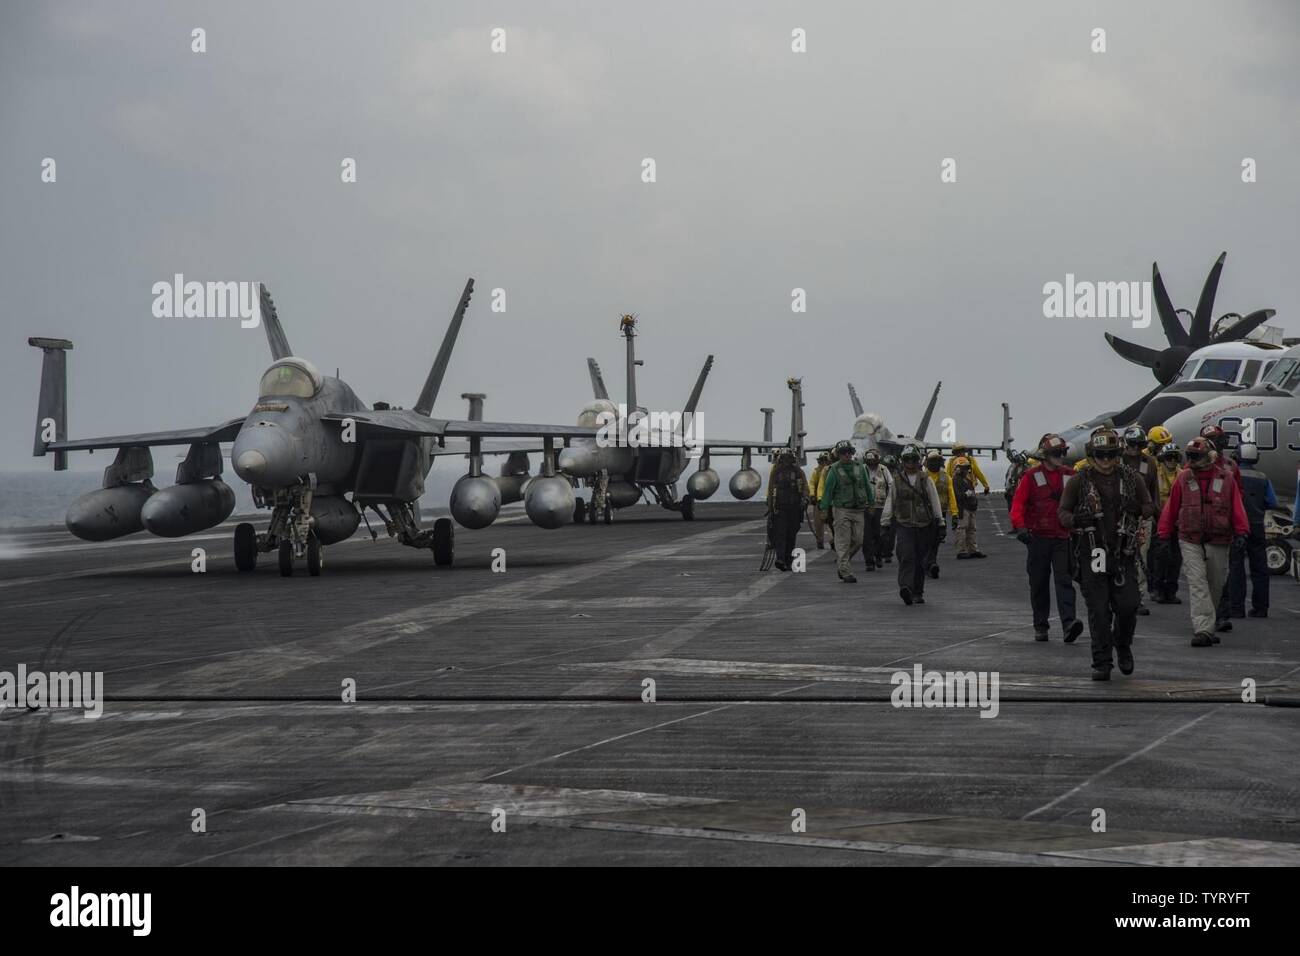 GULF (Nov. 24, 2016) Sailors and aircraft maneuver across the flight deck of the aircraft carrier USS Dwight D. Eisenhower (CVN 69) (Ike). Ike and its Carrier Strike Group are deployed in support of Operation Inherent Resolve, maritime security operations and theater security cooperation efforts in the U.S. 5th Fleet area of operations. Stock Photo